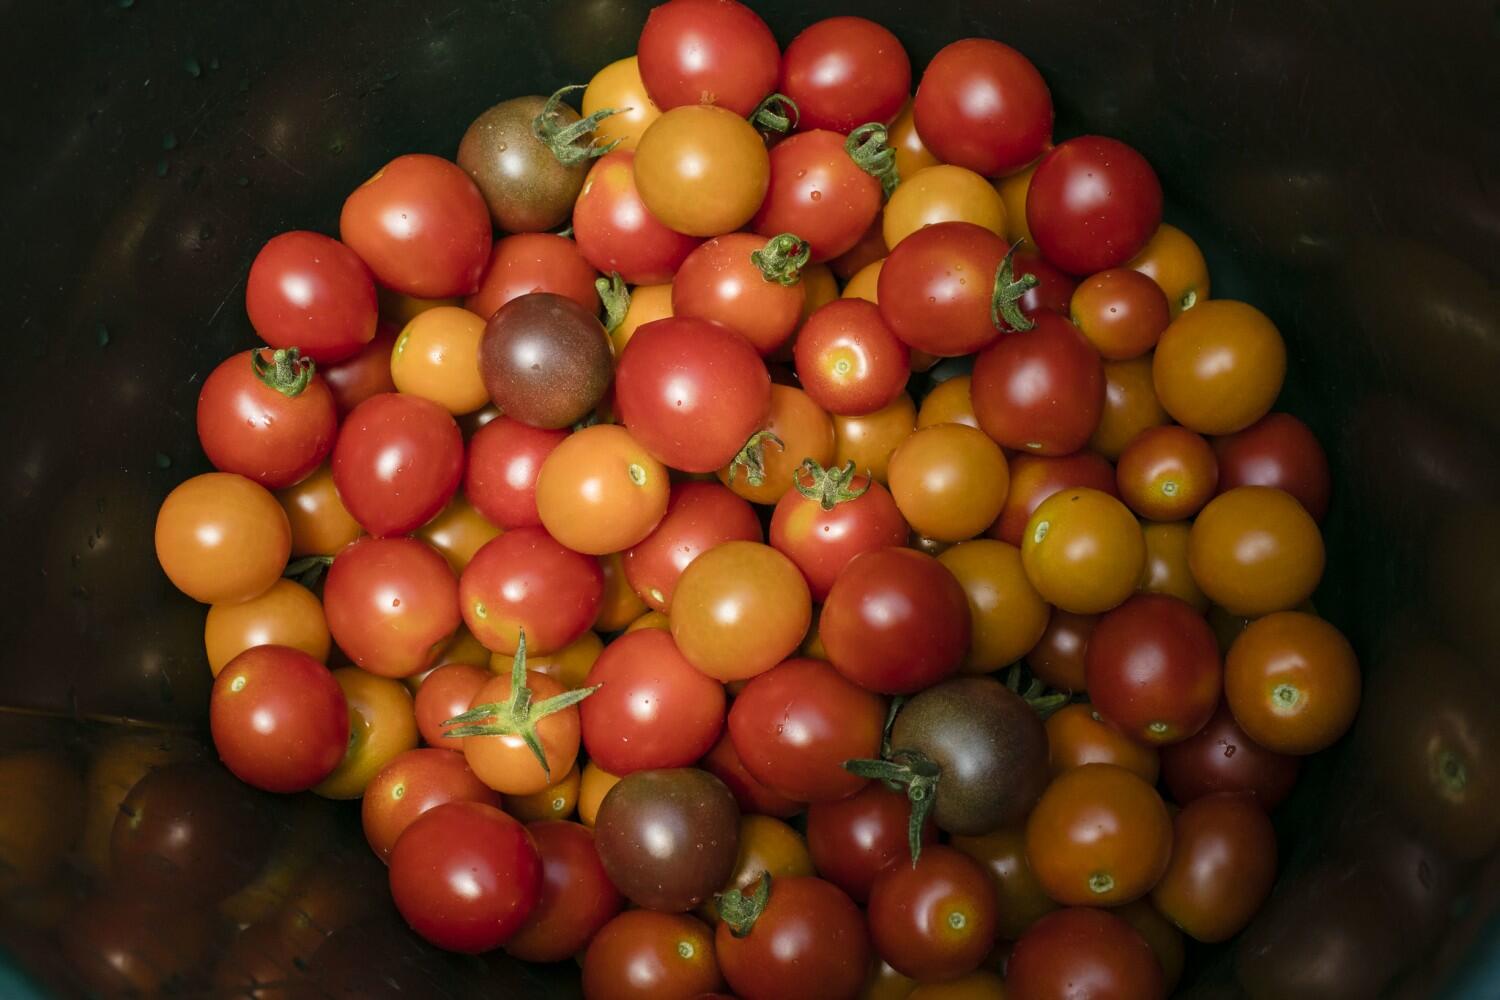 Tomatoes, but not farm workers, gardeners, safe from soil lead